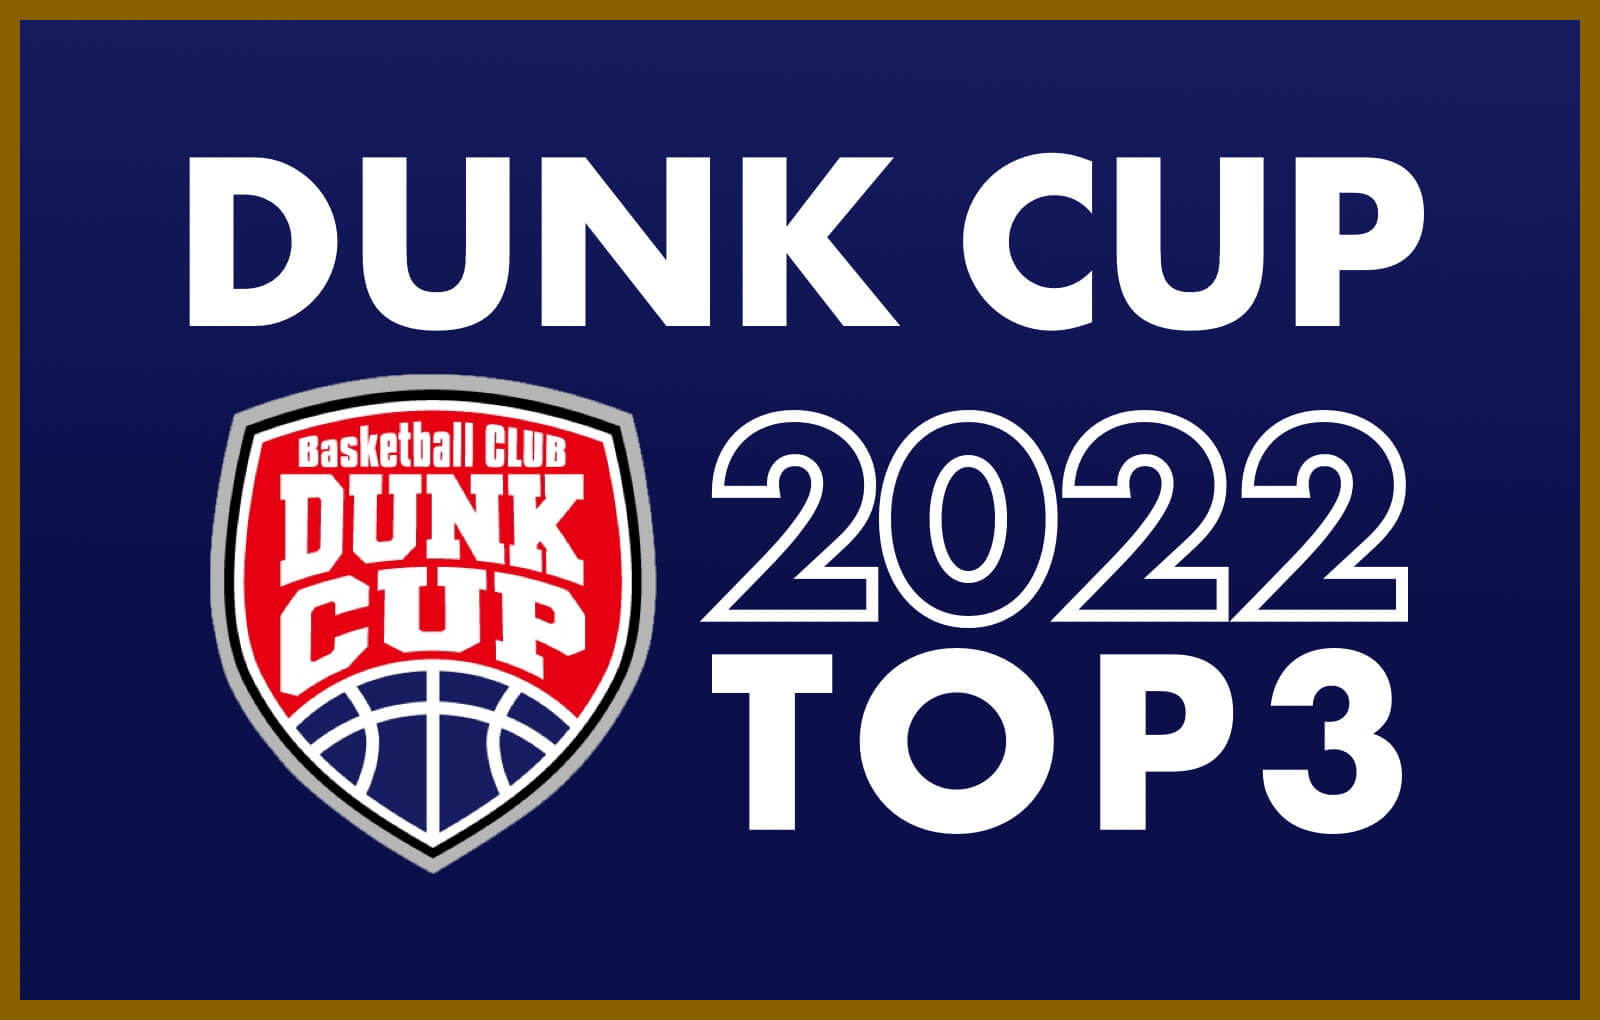 DUNK CUP 2022 TOP3 結果発表!!